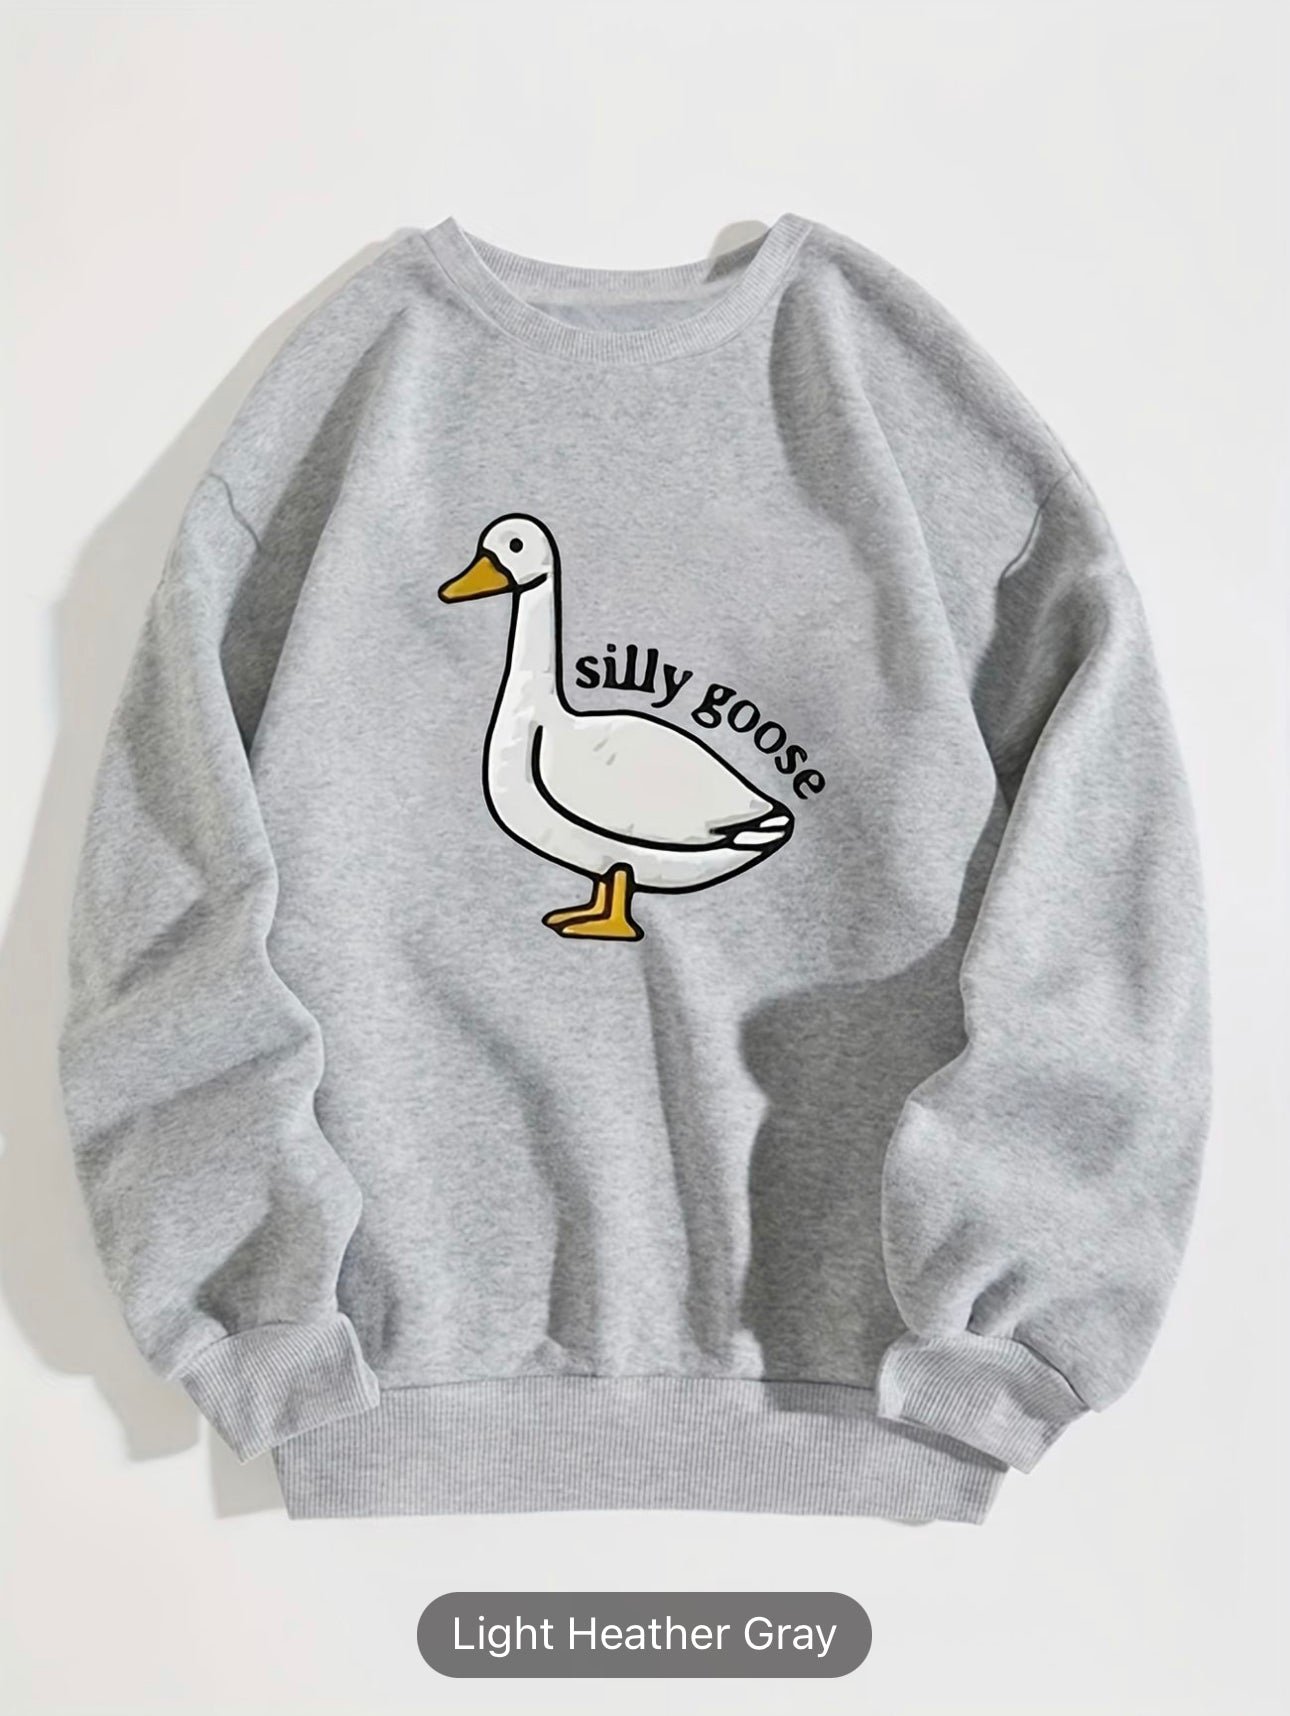 Silly Goose Print Crew Neck Fleece Sweatshirt Warm Pullover For Men Solid Color Sweatshirts For Winter Fall Long Sleeve Tops